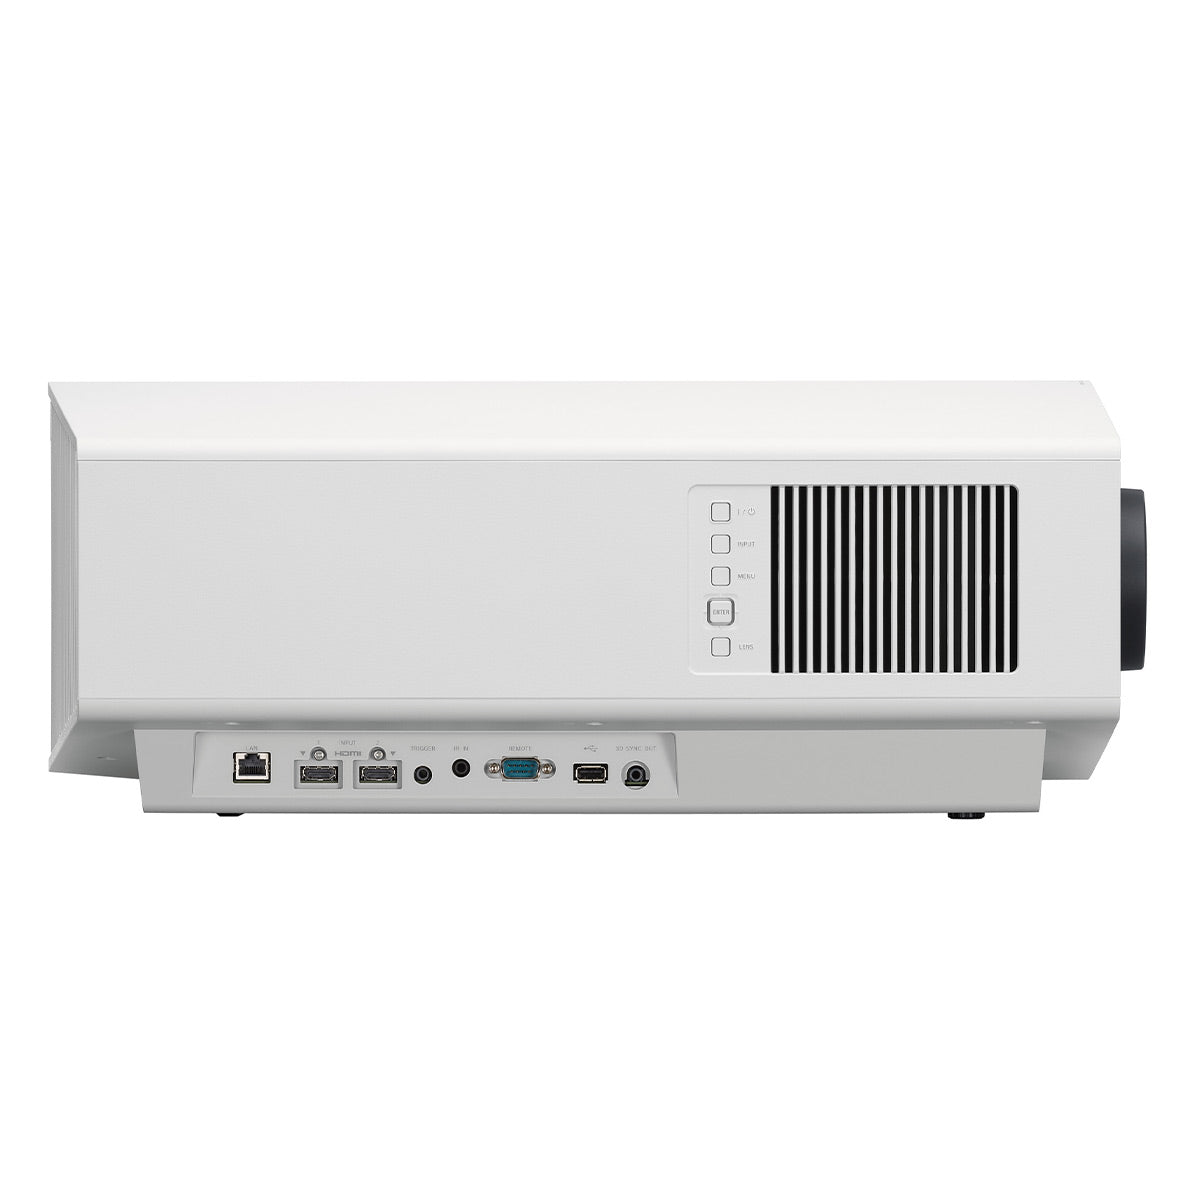 Sony VPL-XW6000ES 4K HDR Laser Home Theater Projector with Wide Dynamic Range Optics, 95% DCI-P3 Wide Color Gamut, and 2,500 Lumen Brightness (White)